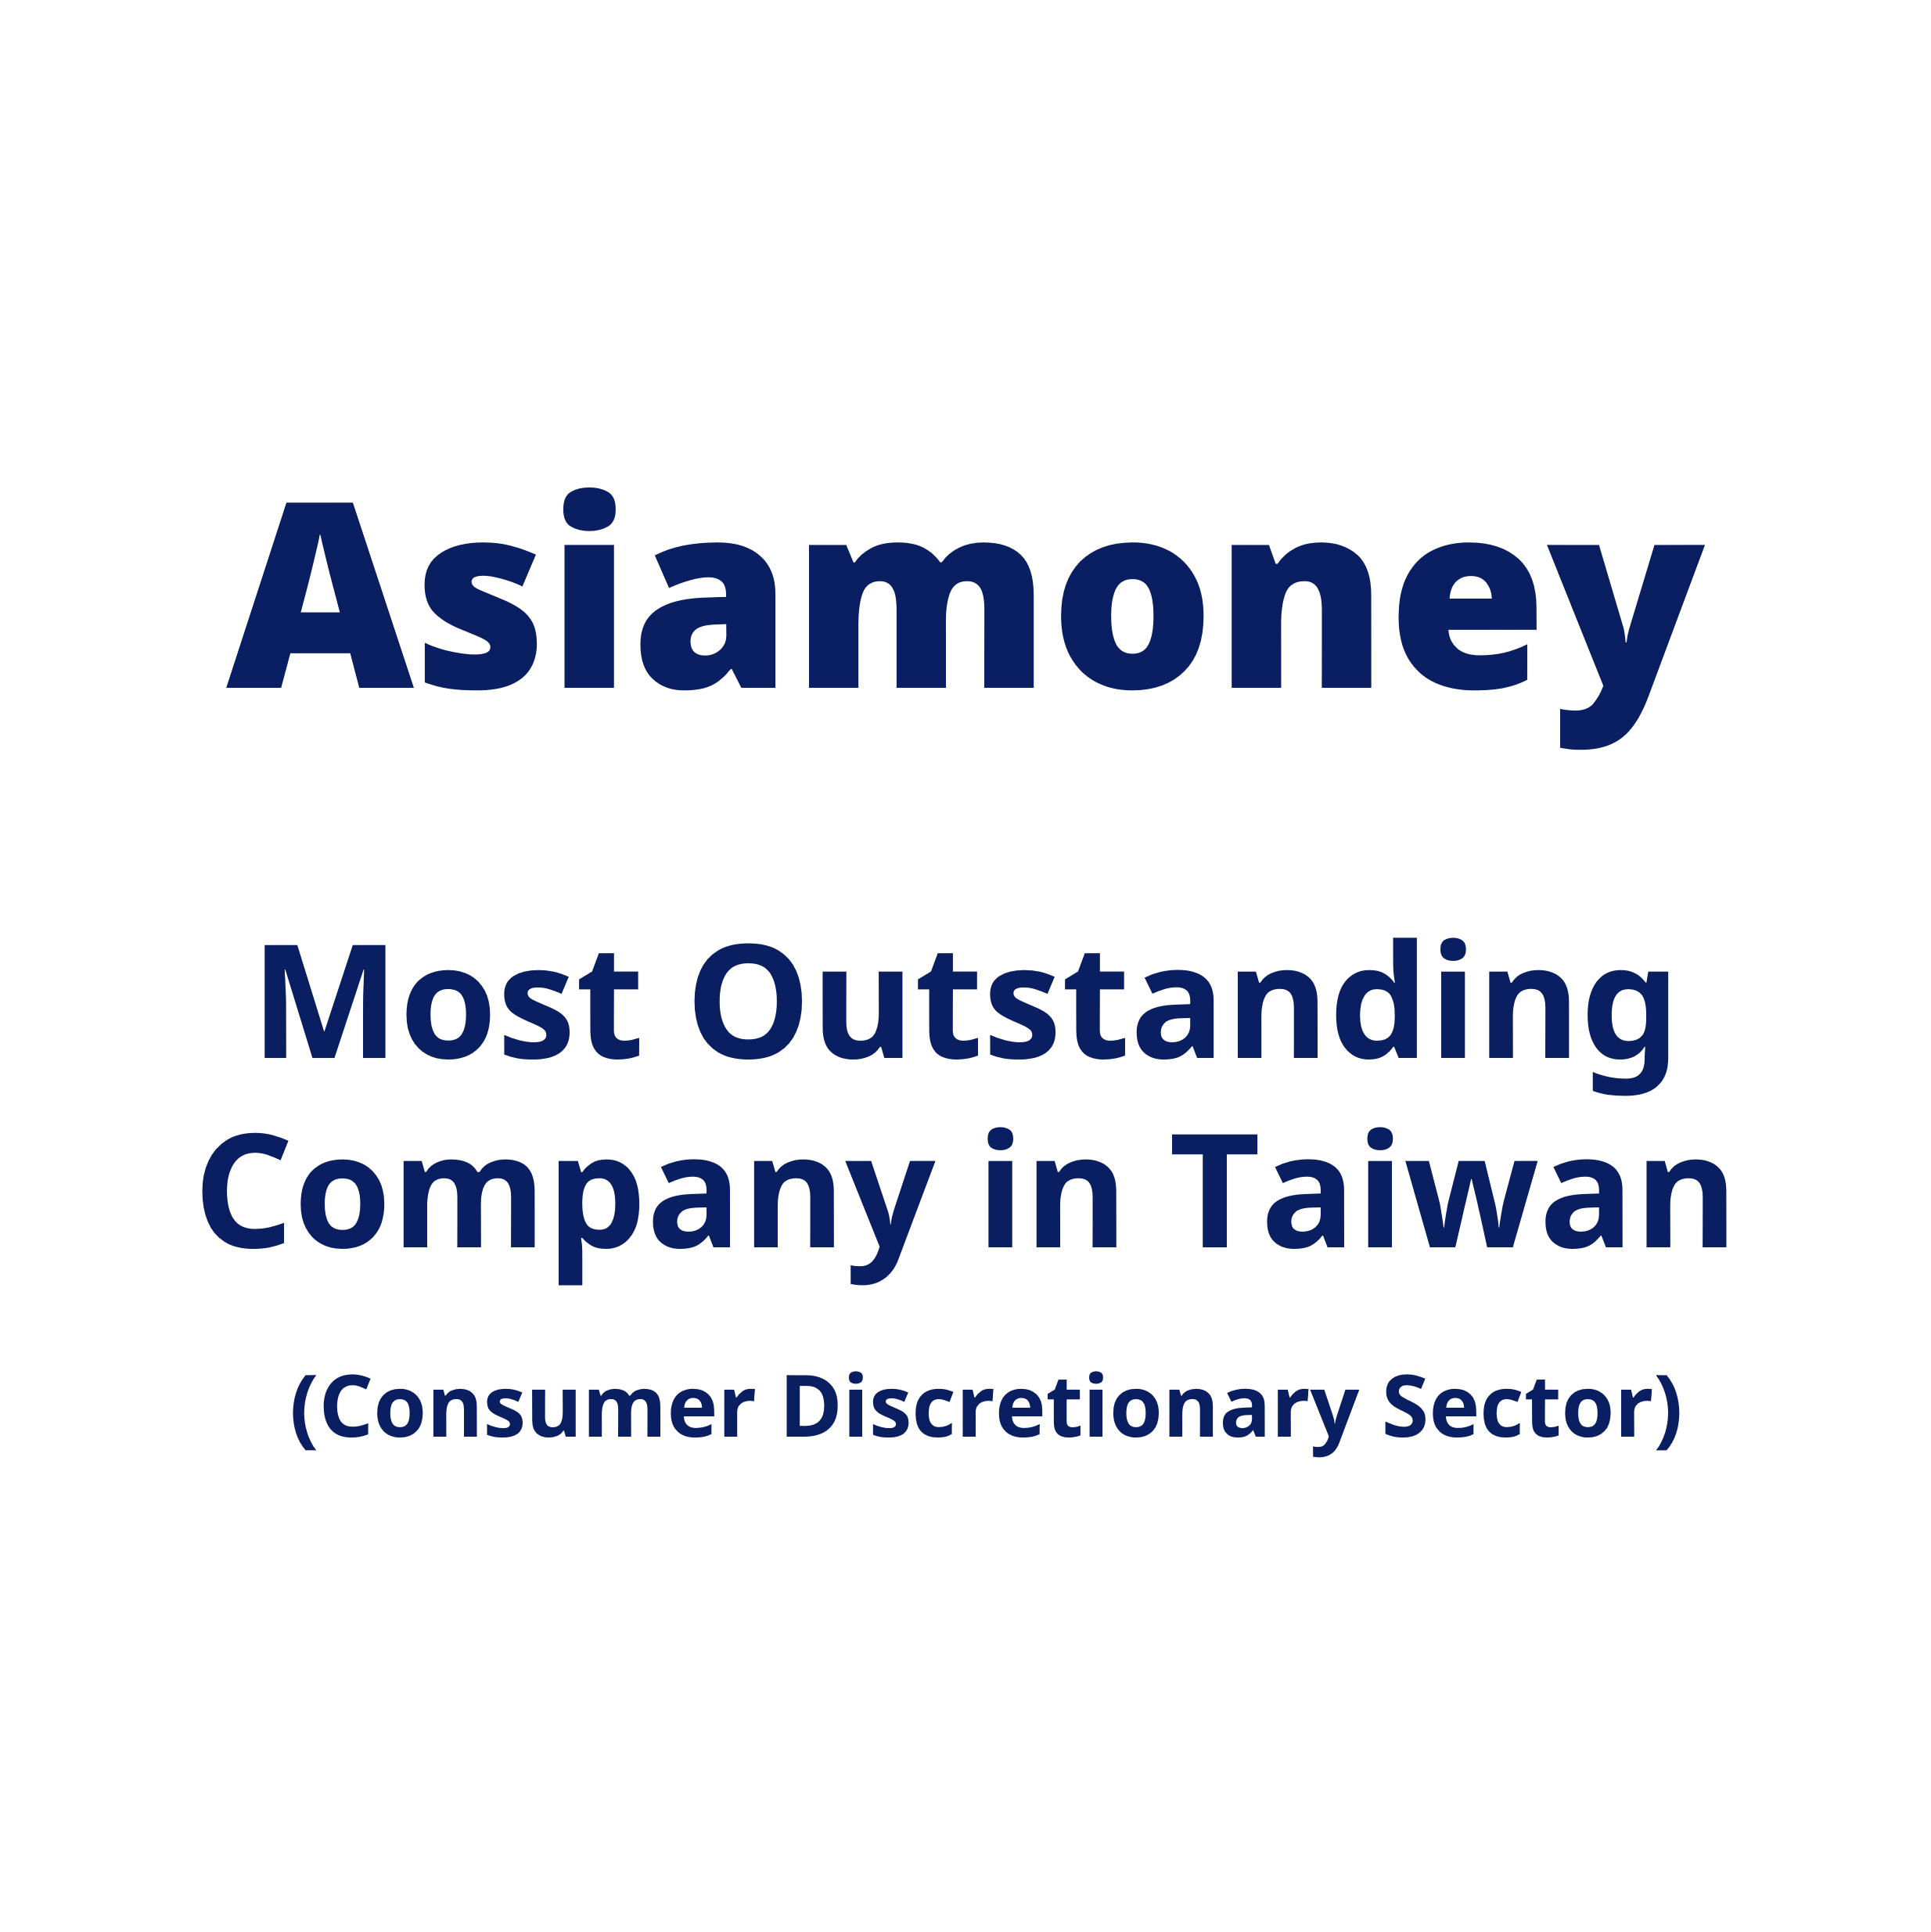 Asiamoney-Most Outstanding Company in Taiwan (Consumer Discretionary Sector)